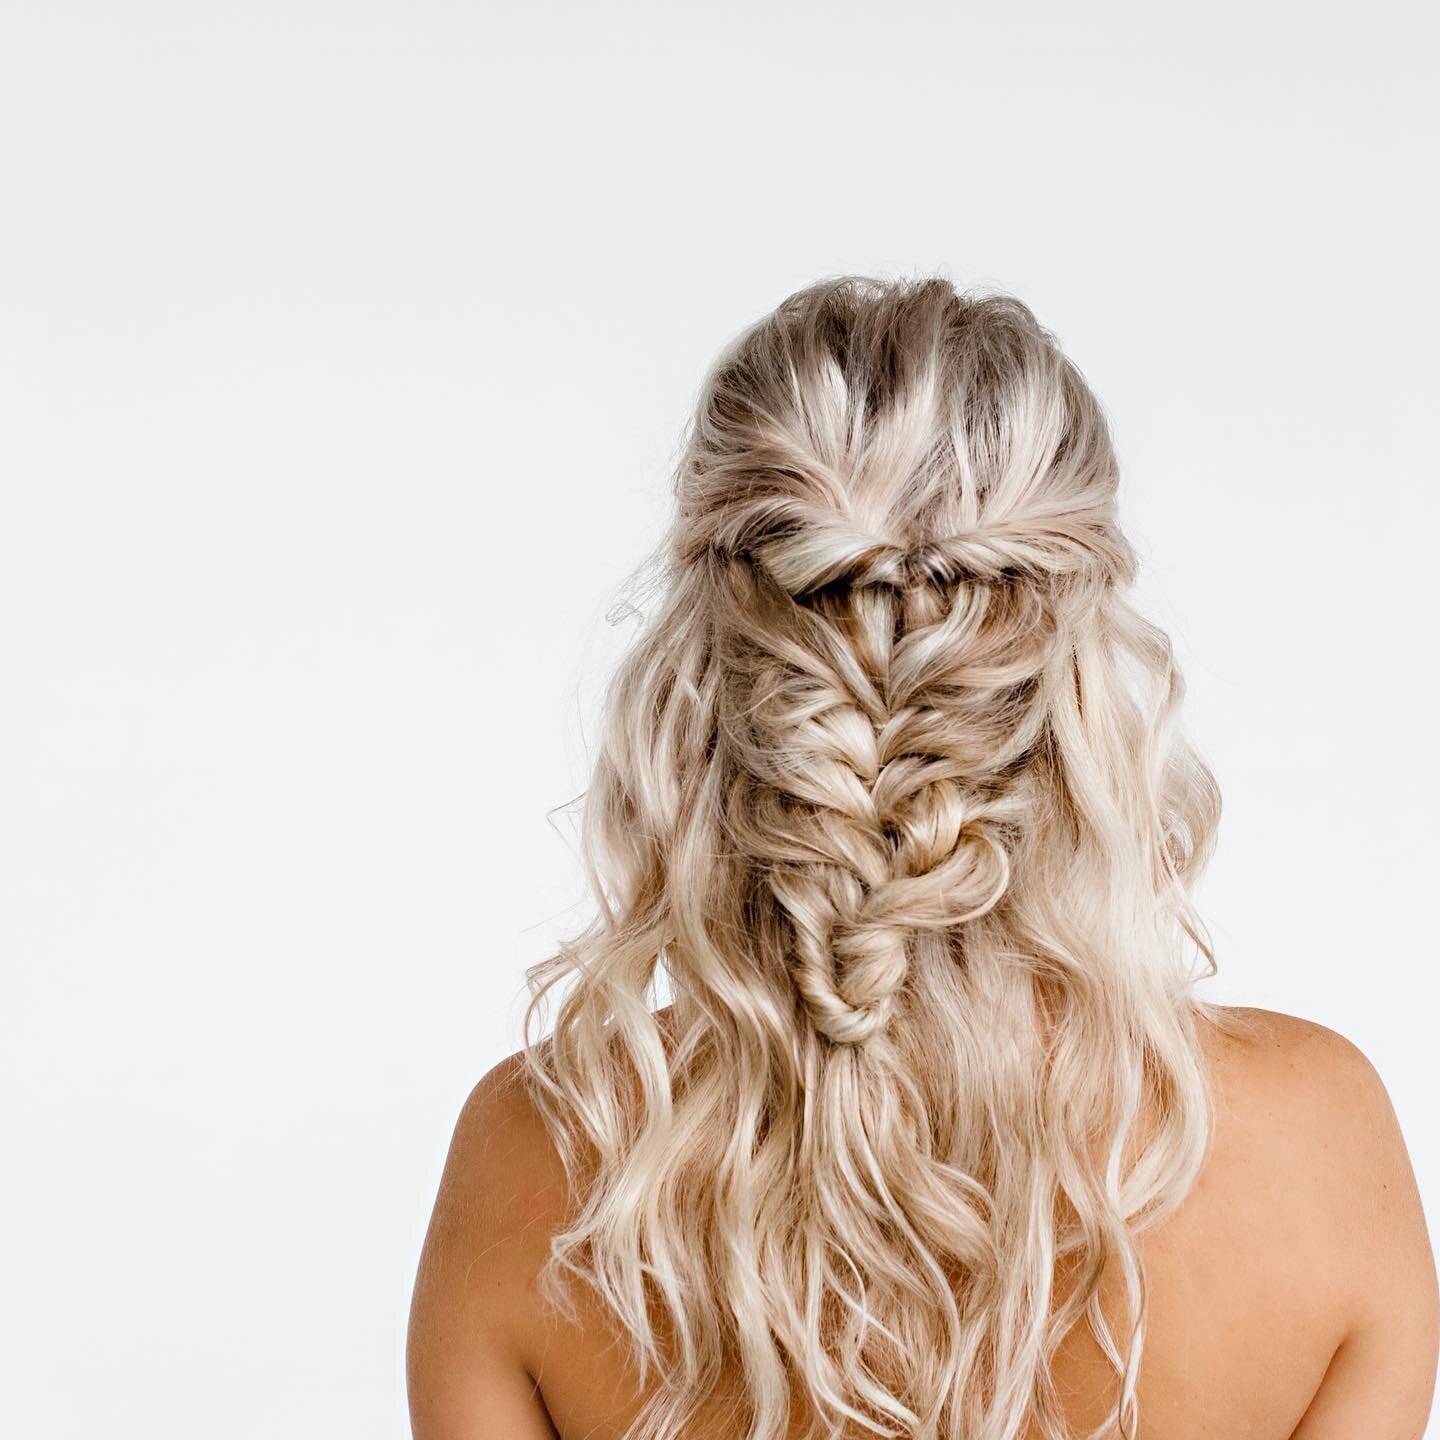 Happy Friday babes💕

We are always about some braids &amp; waves✨👌🏻

#thebellahairco #braidedhairstyles #braids #braidstyles #weddinghair #weddinghairstyles #bridalhairstyle #bridalhair #ncsalon #ncsalons #winstonsalemsalon